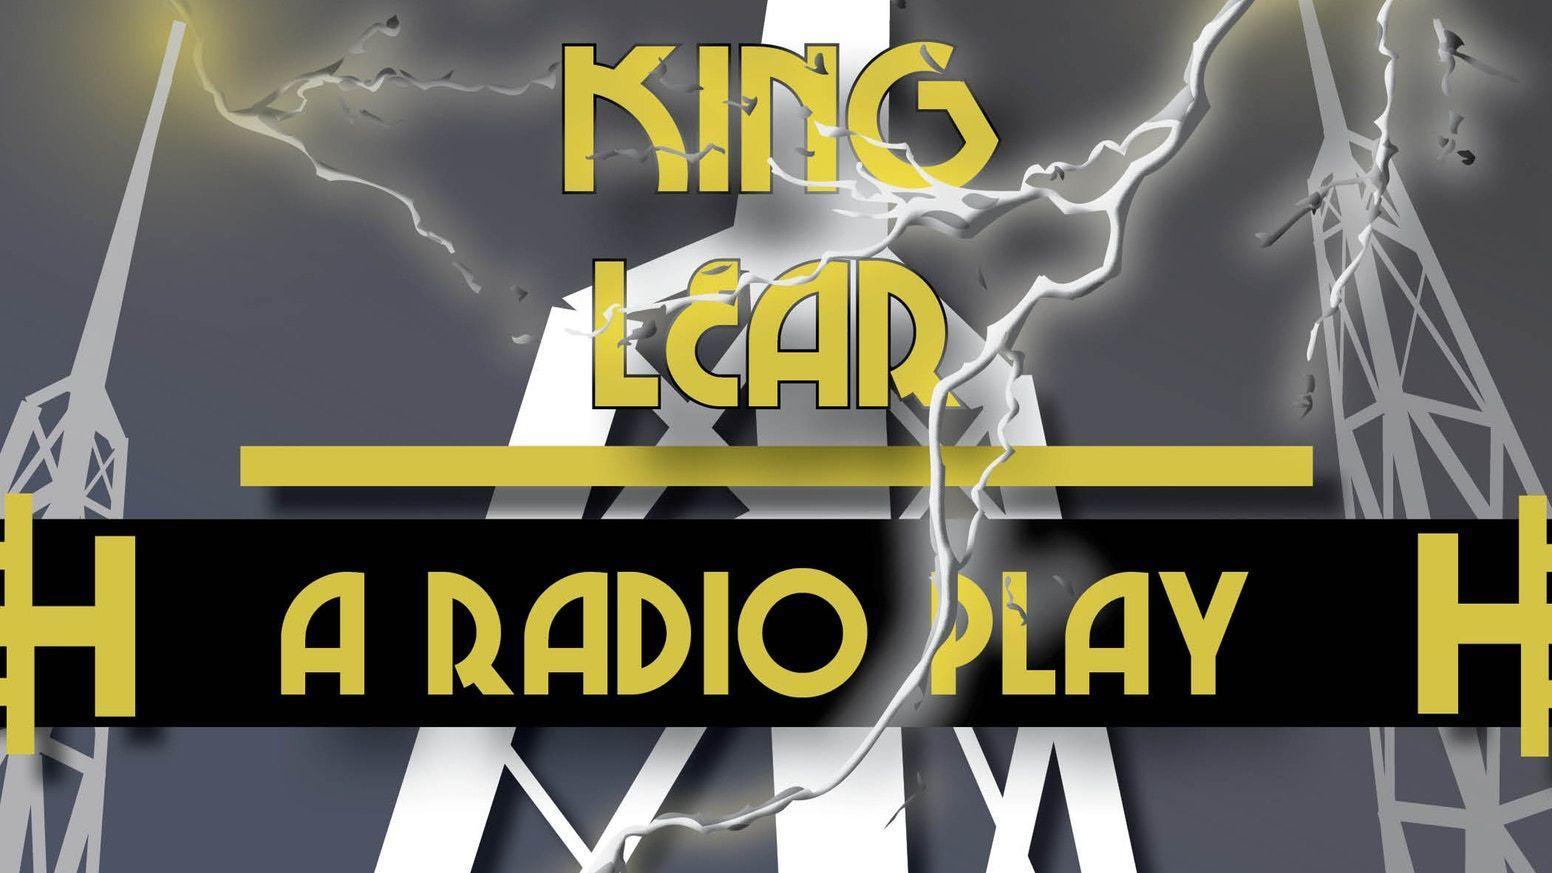 Dylan King Logo - King Lear: A Radio Play by Chad and Dylan Community